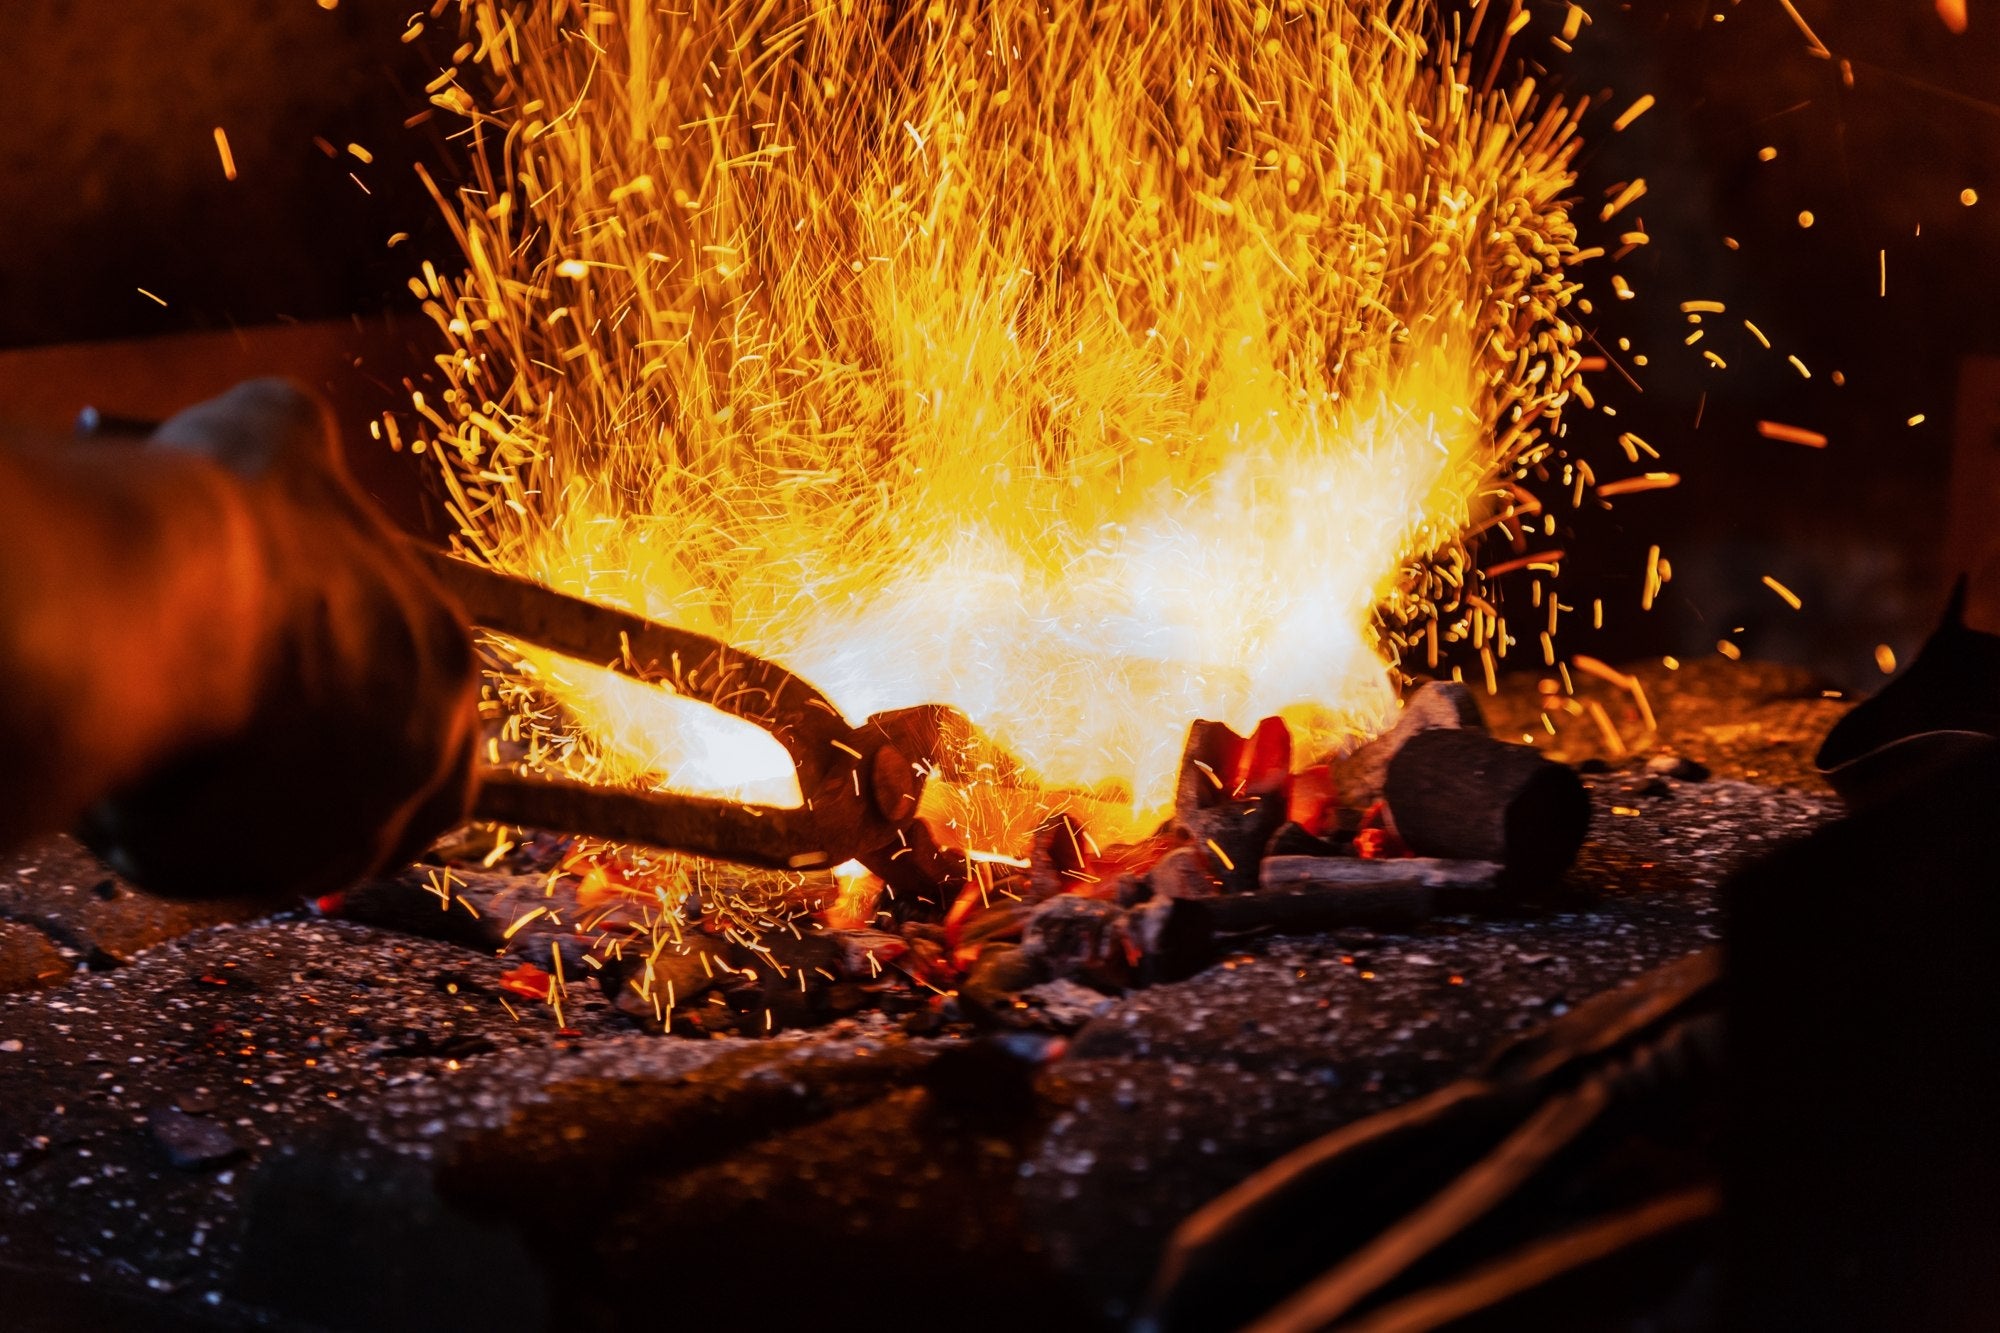 The hands of the blacksmith, unrecognizable, are shown preparing the metal for forging, with sparks flying in the background